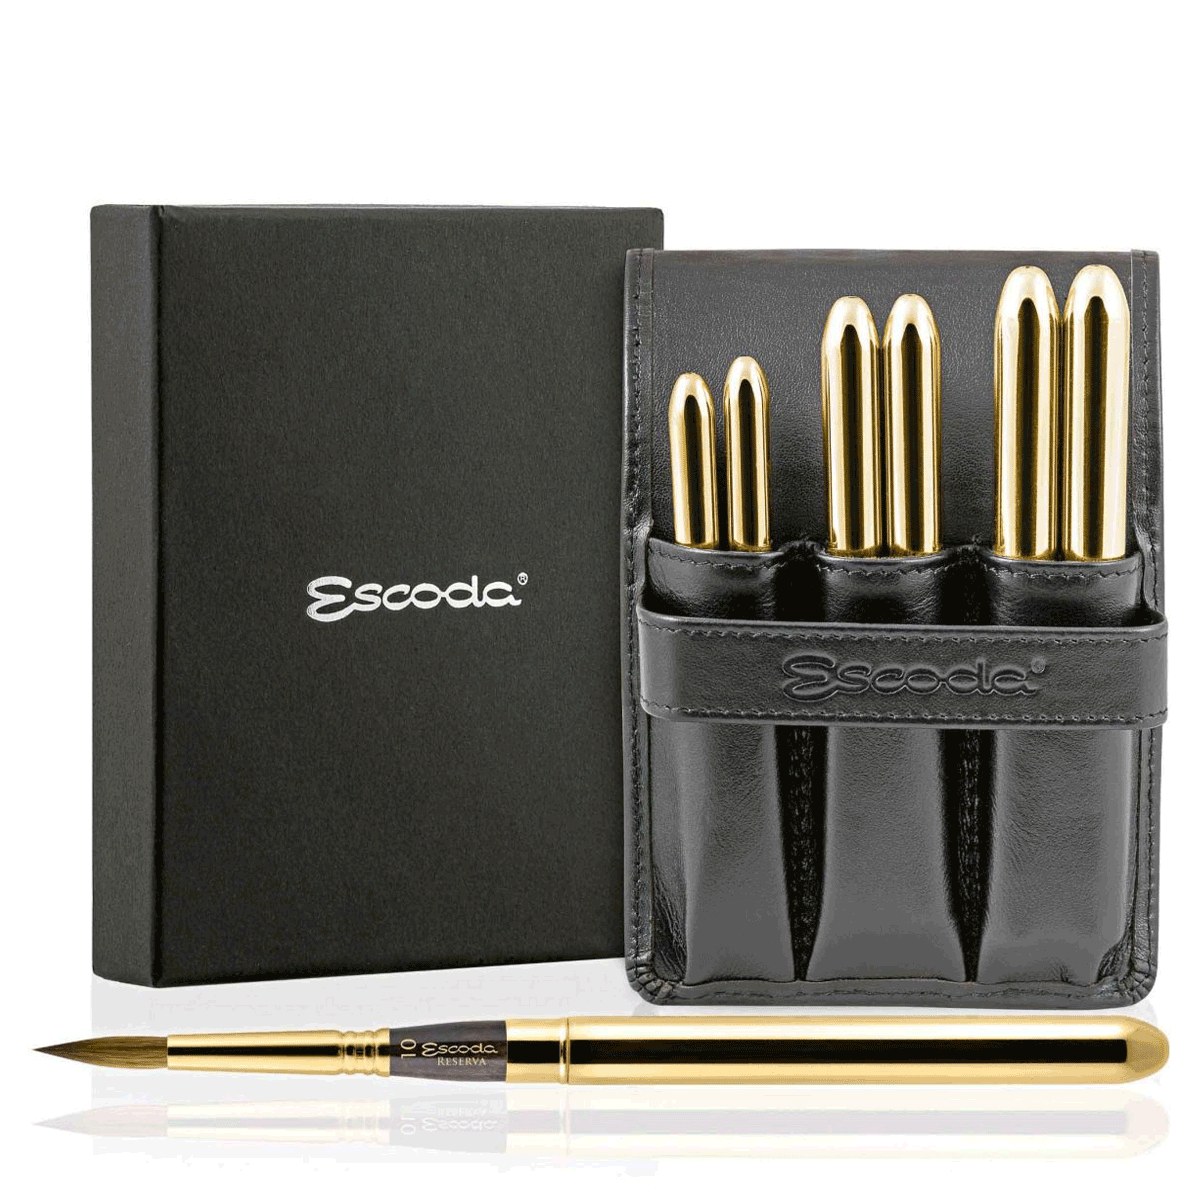 Escoda 1214 Reserva Set of 6 Travel Gold Brushes In Synthetic Leather Case